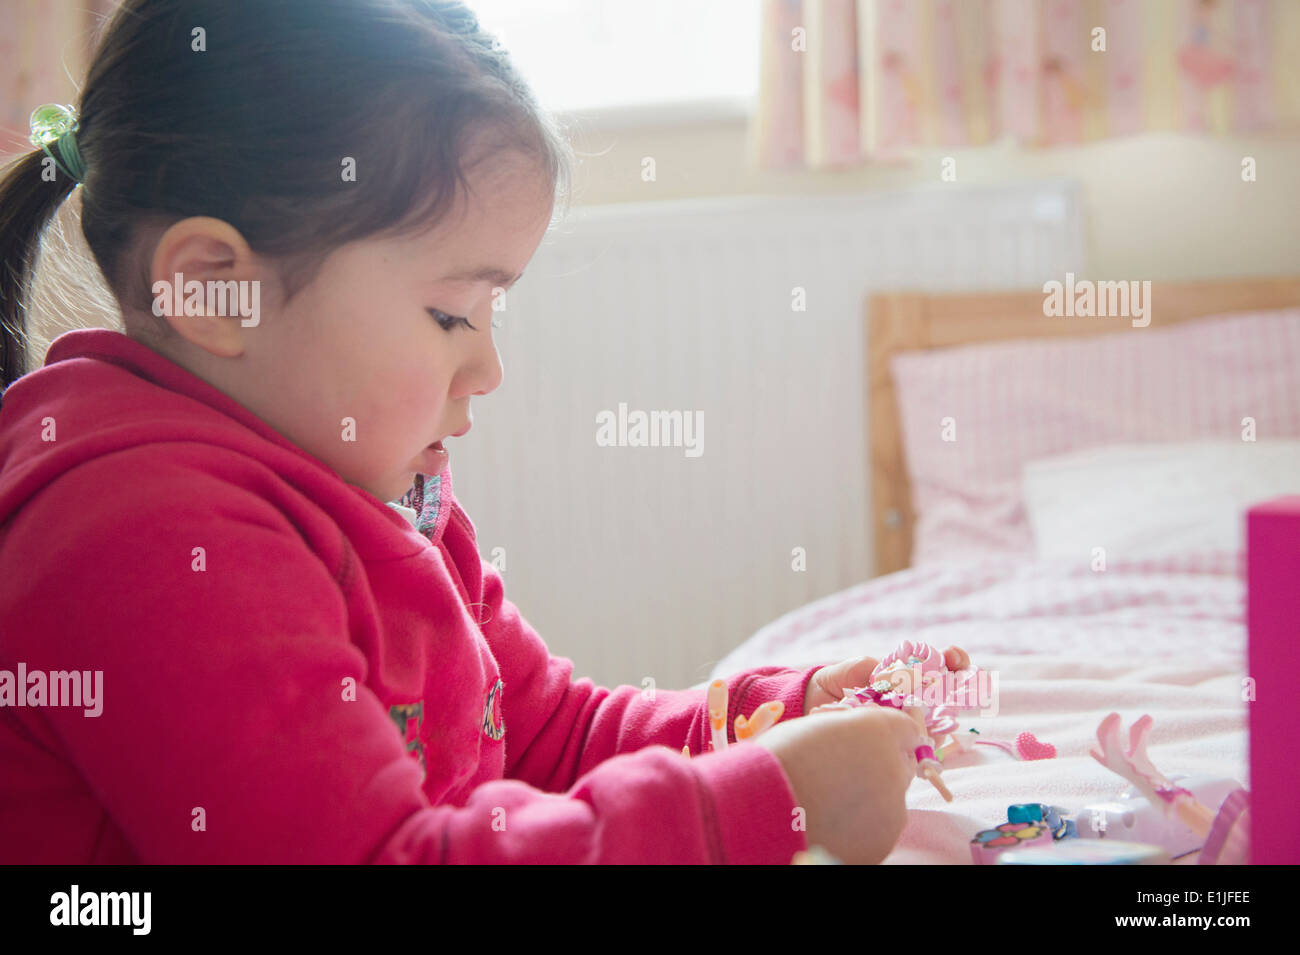 Girl playing by herself Stock Photo